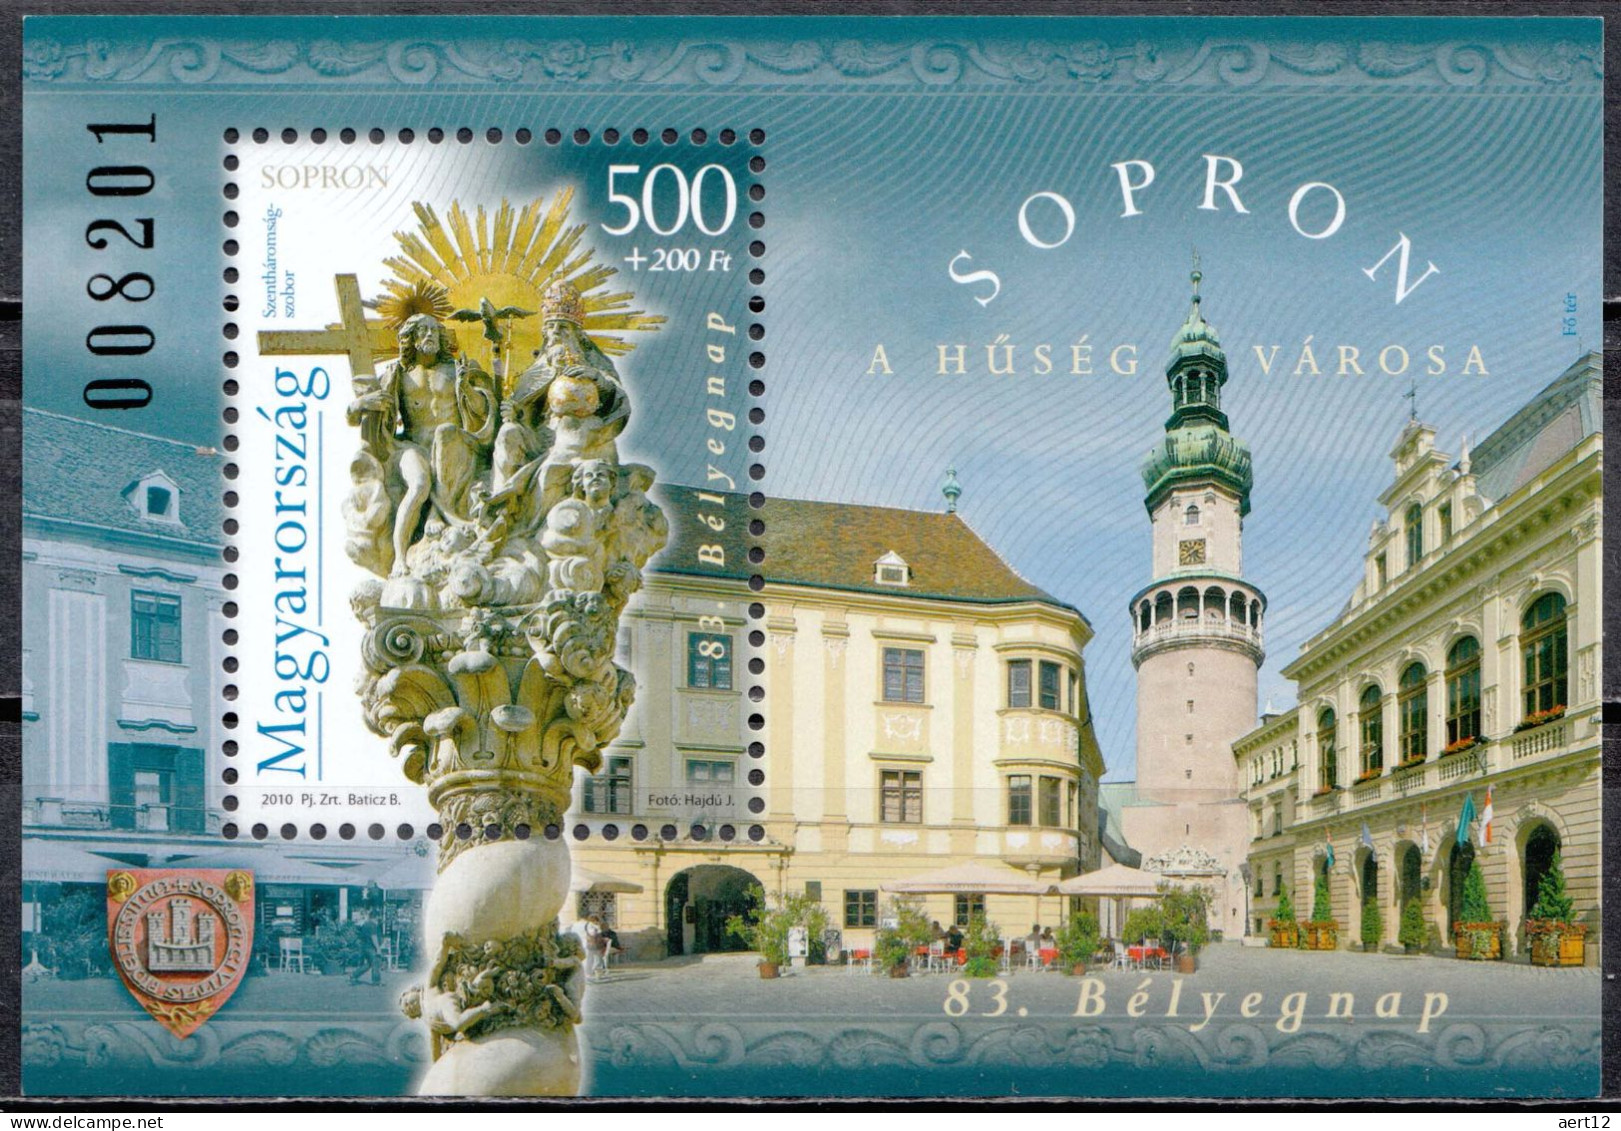 2010, Hungary, City Of Sopron, Architecture, Religion, Sculptures, Stamp Day, Souvenir Sheet, MNH(**), HU BL332 - Nuevos